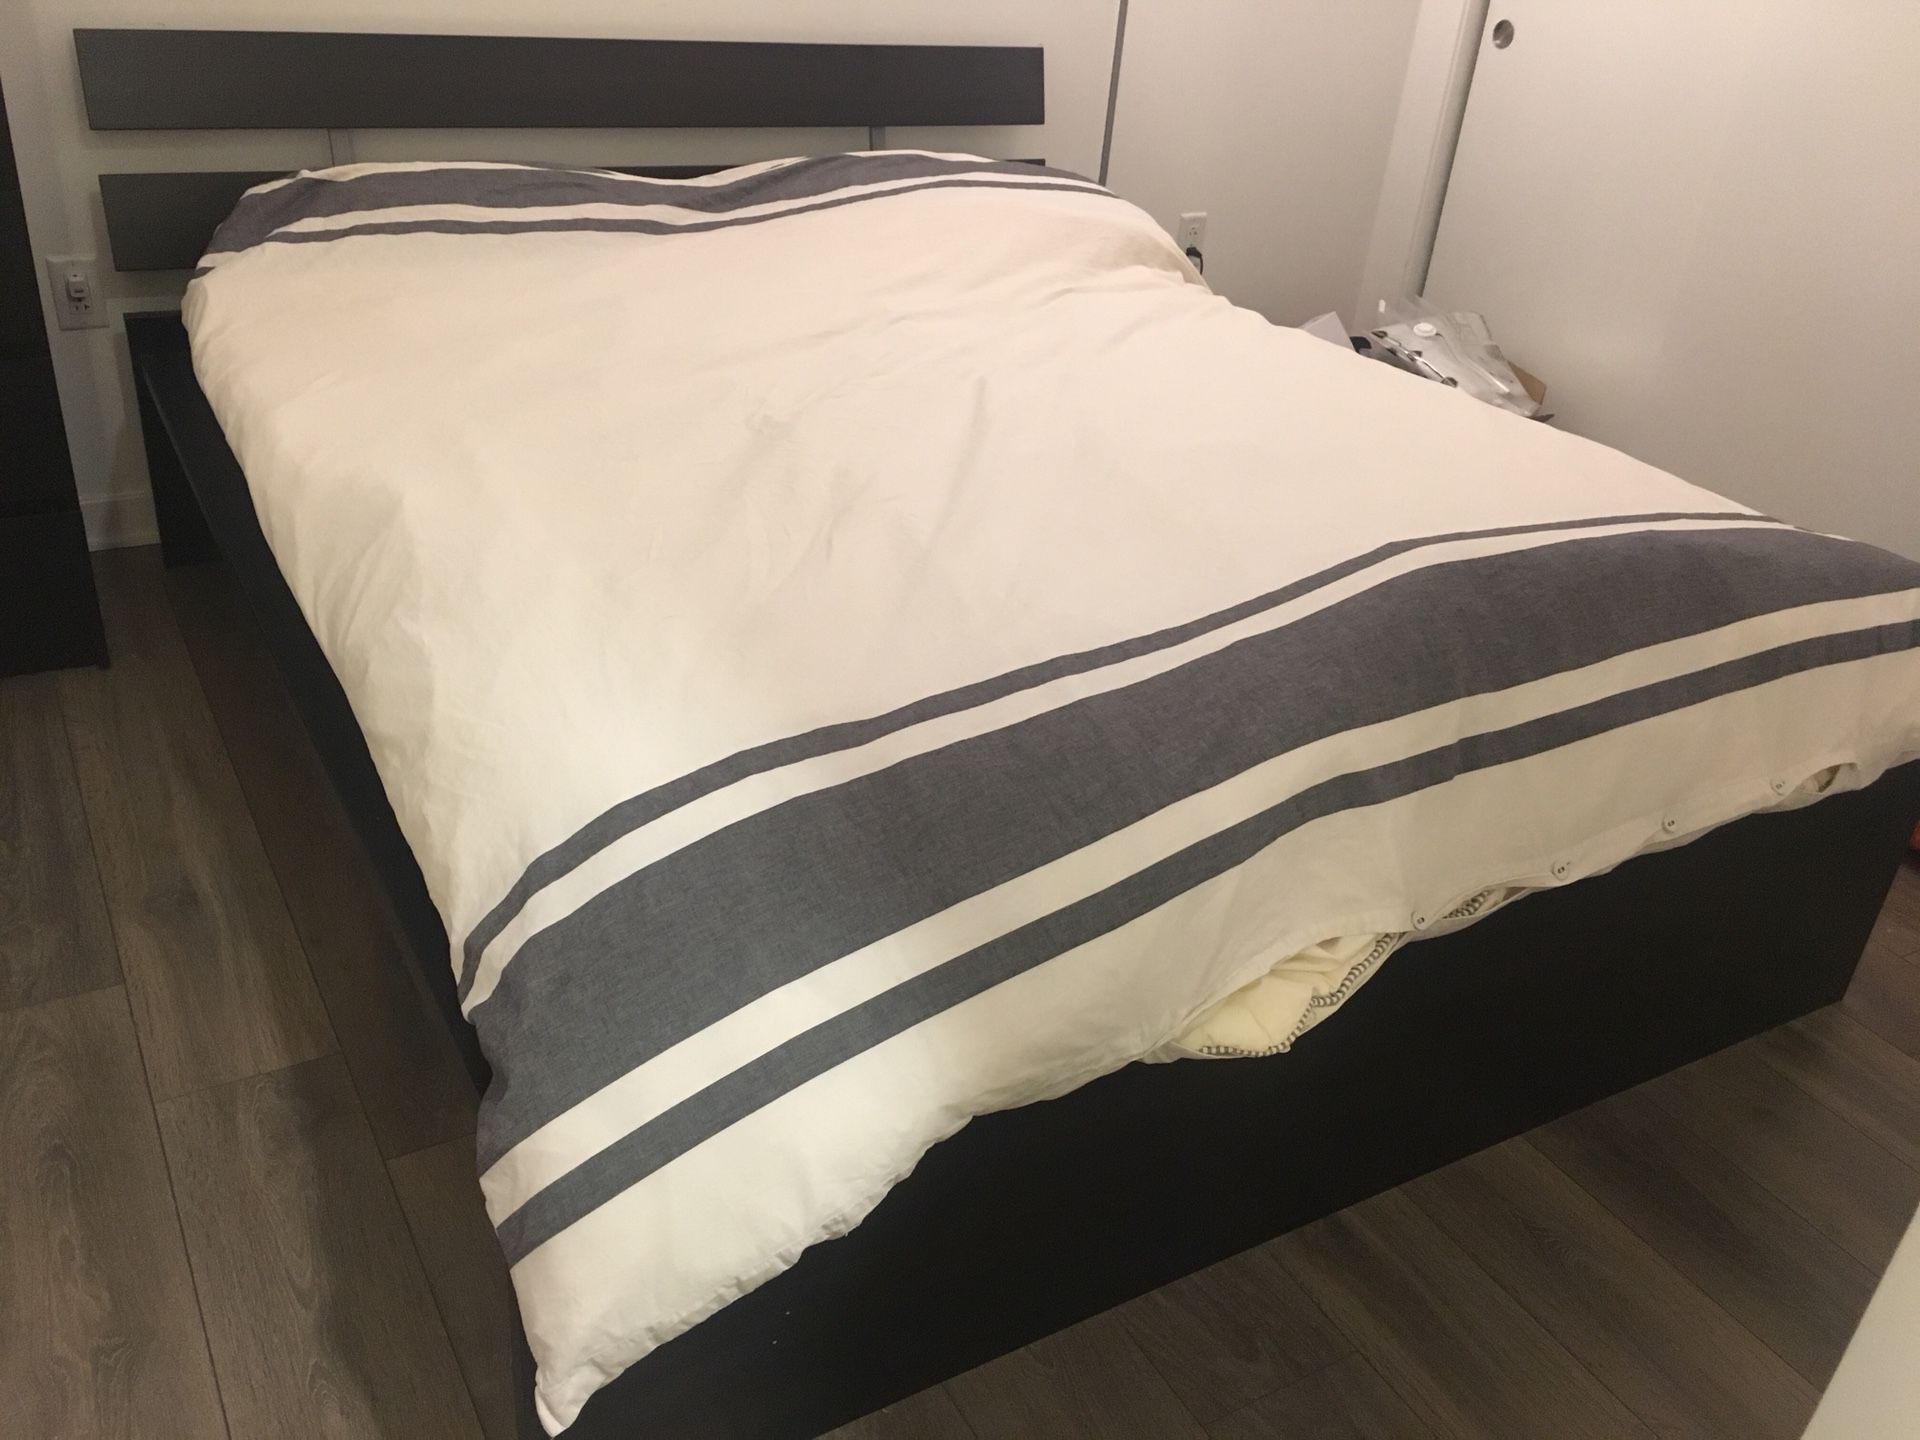 Supper comfortable IKEA queen bed and mattress. Moving sale.